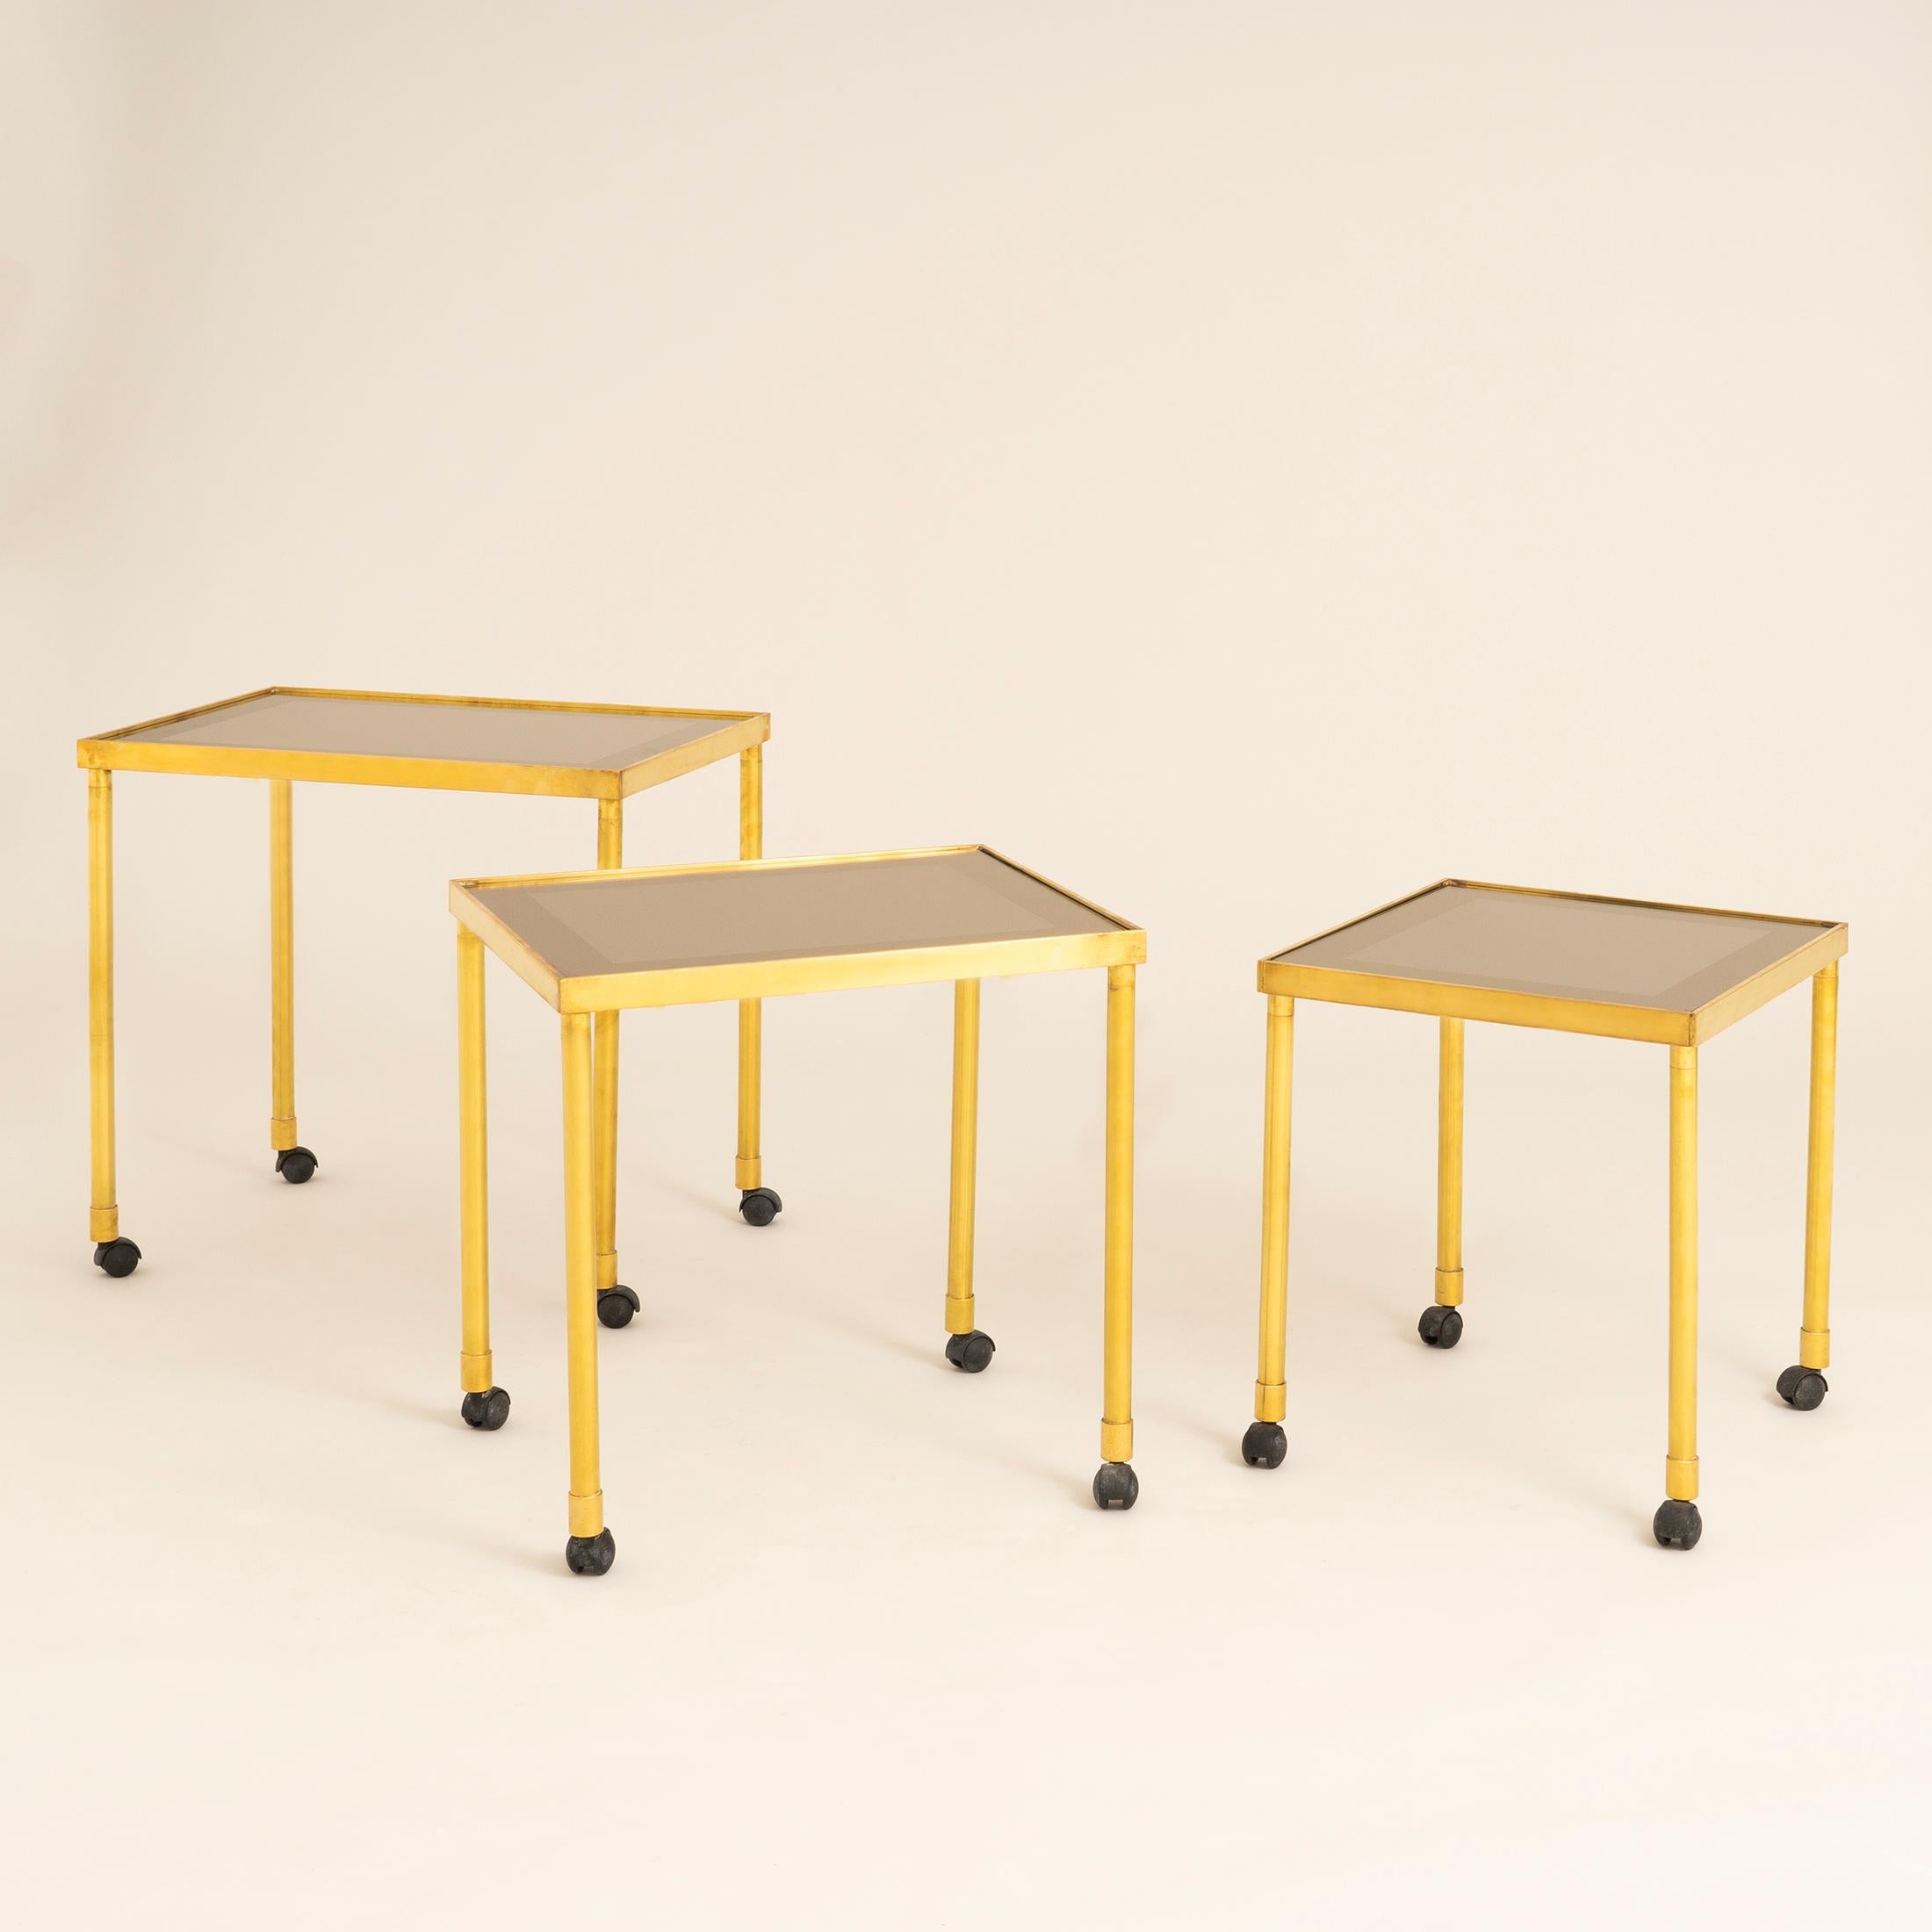 Nest of three brass Italian side tables each with a Smokey glass top with a mirror surround. Each table moves by castor wheels making them easy to spread around the room.